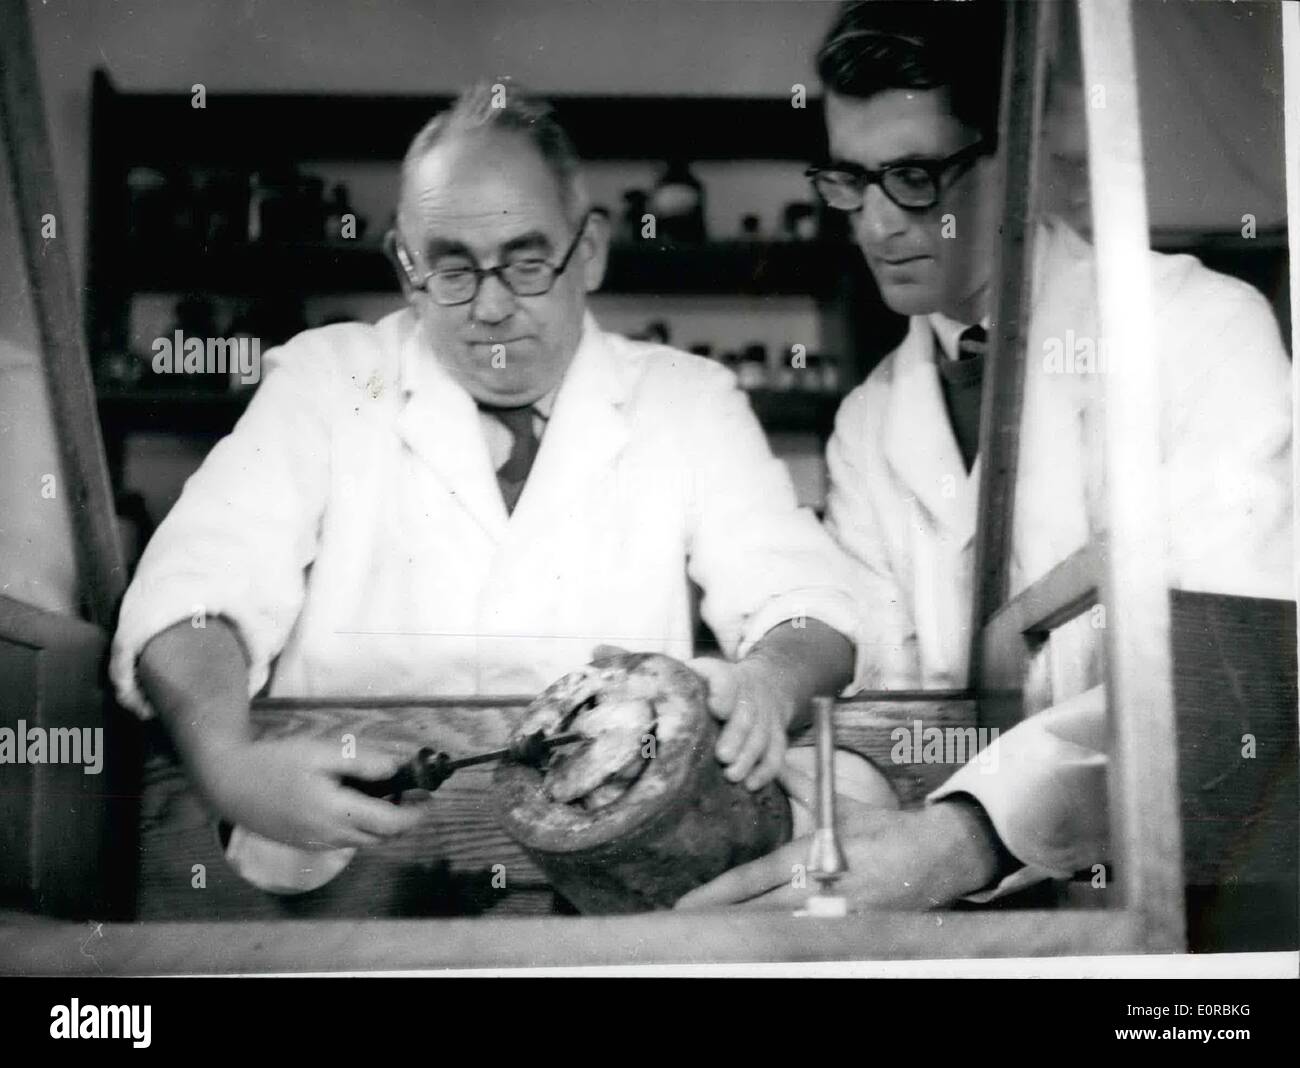 Dec. 11, 1958 - 11-12-58 Tin of veal dated 1823 opened today. At the British Food Manufacturing Industries Research Association Laboratorien, at Letherhead, Surrey, today, a tin of veal, dated 1823, which was found in 1829 beside Hudson Bay by Sir John Ross, was opened and stated to be in fair condition for its age . The tin was part of explorer Capt. Parry's stock in HMS Fury. Keystone Photo Shows: R.L. Shipp, Chief Bacterialogist, opening the tin of veal today. Stock Photo